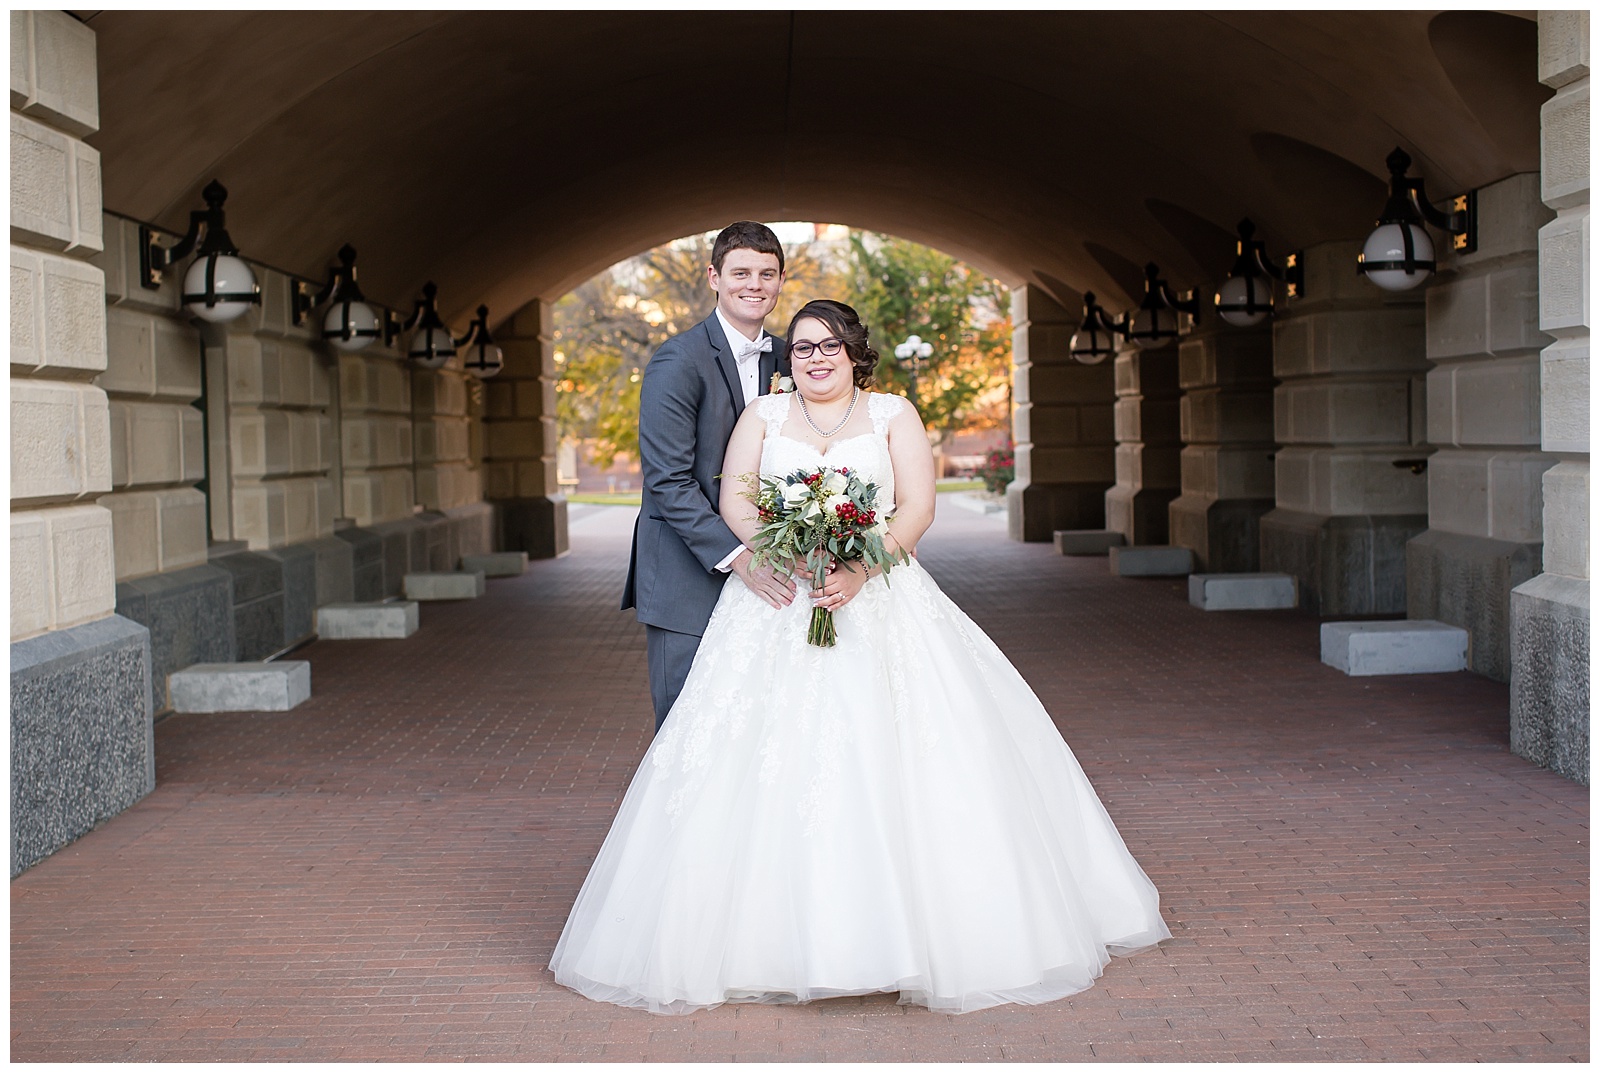 Wedding photography at the Capitol Building in Topeka, Kansas.